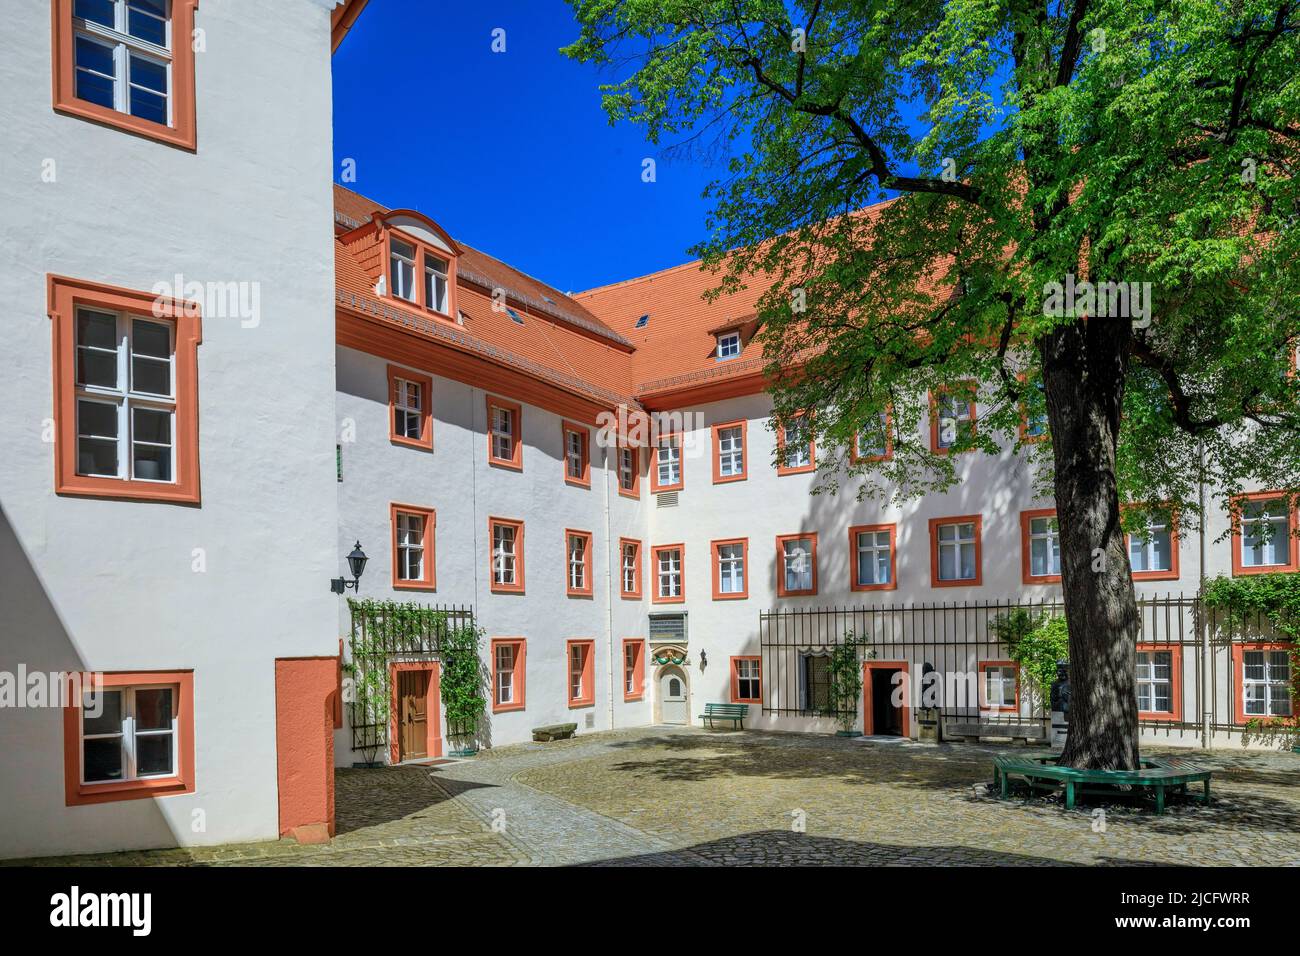 Cathedral monastery in Bautzen: The more than 1000 year old city of Bautzen in Upper Lusatia has a well restored old town with many towers and historic buildings. Stock Photo